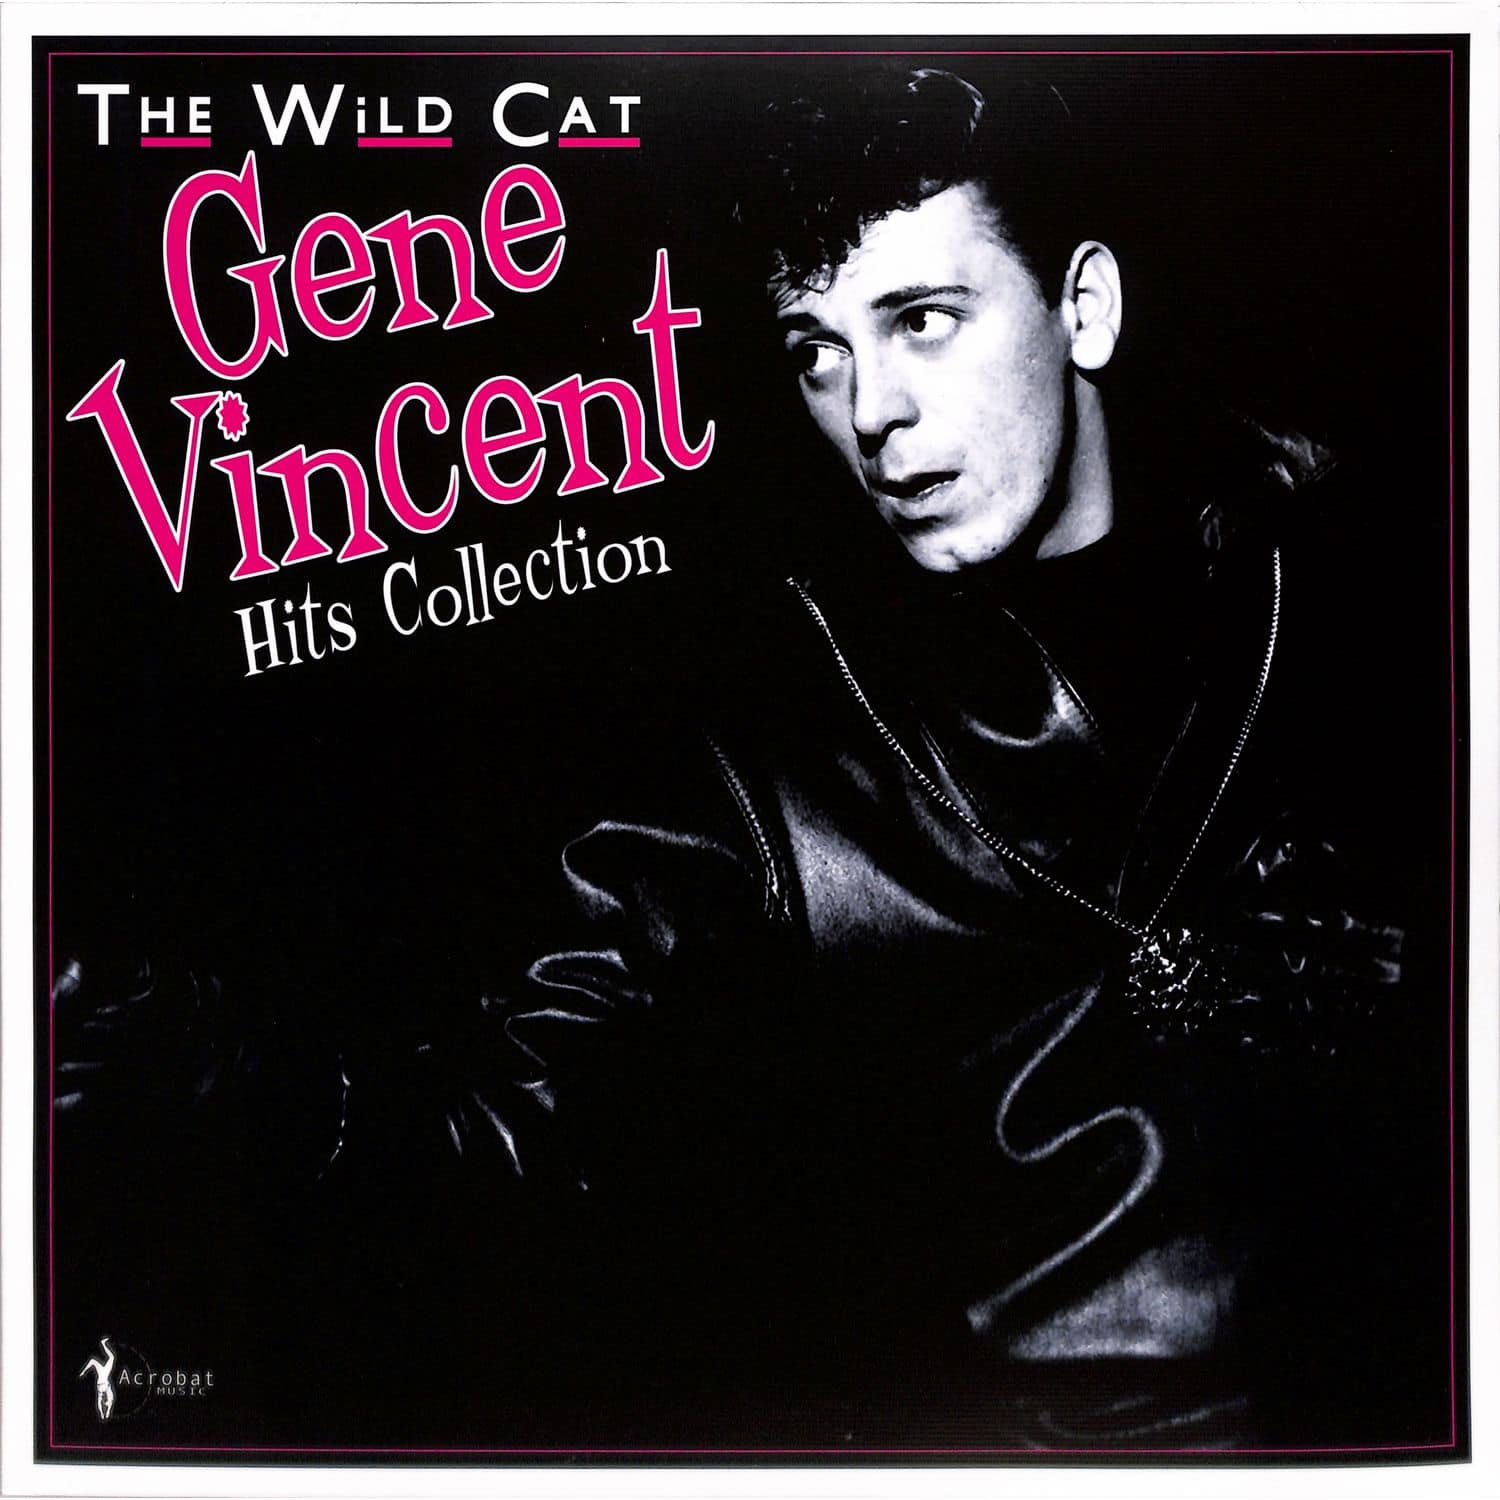 Gene Vincent - WILD CAT: HITS COLLECTION 1956-62 